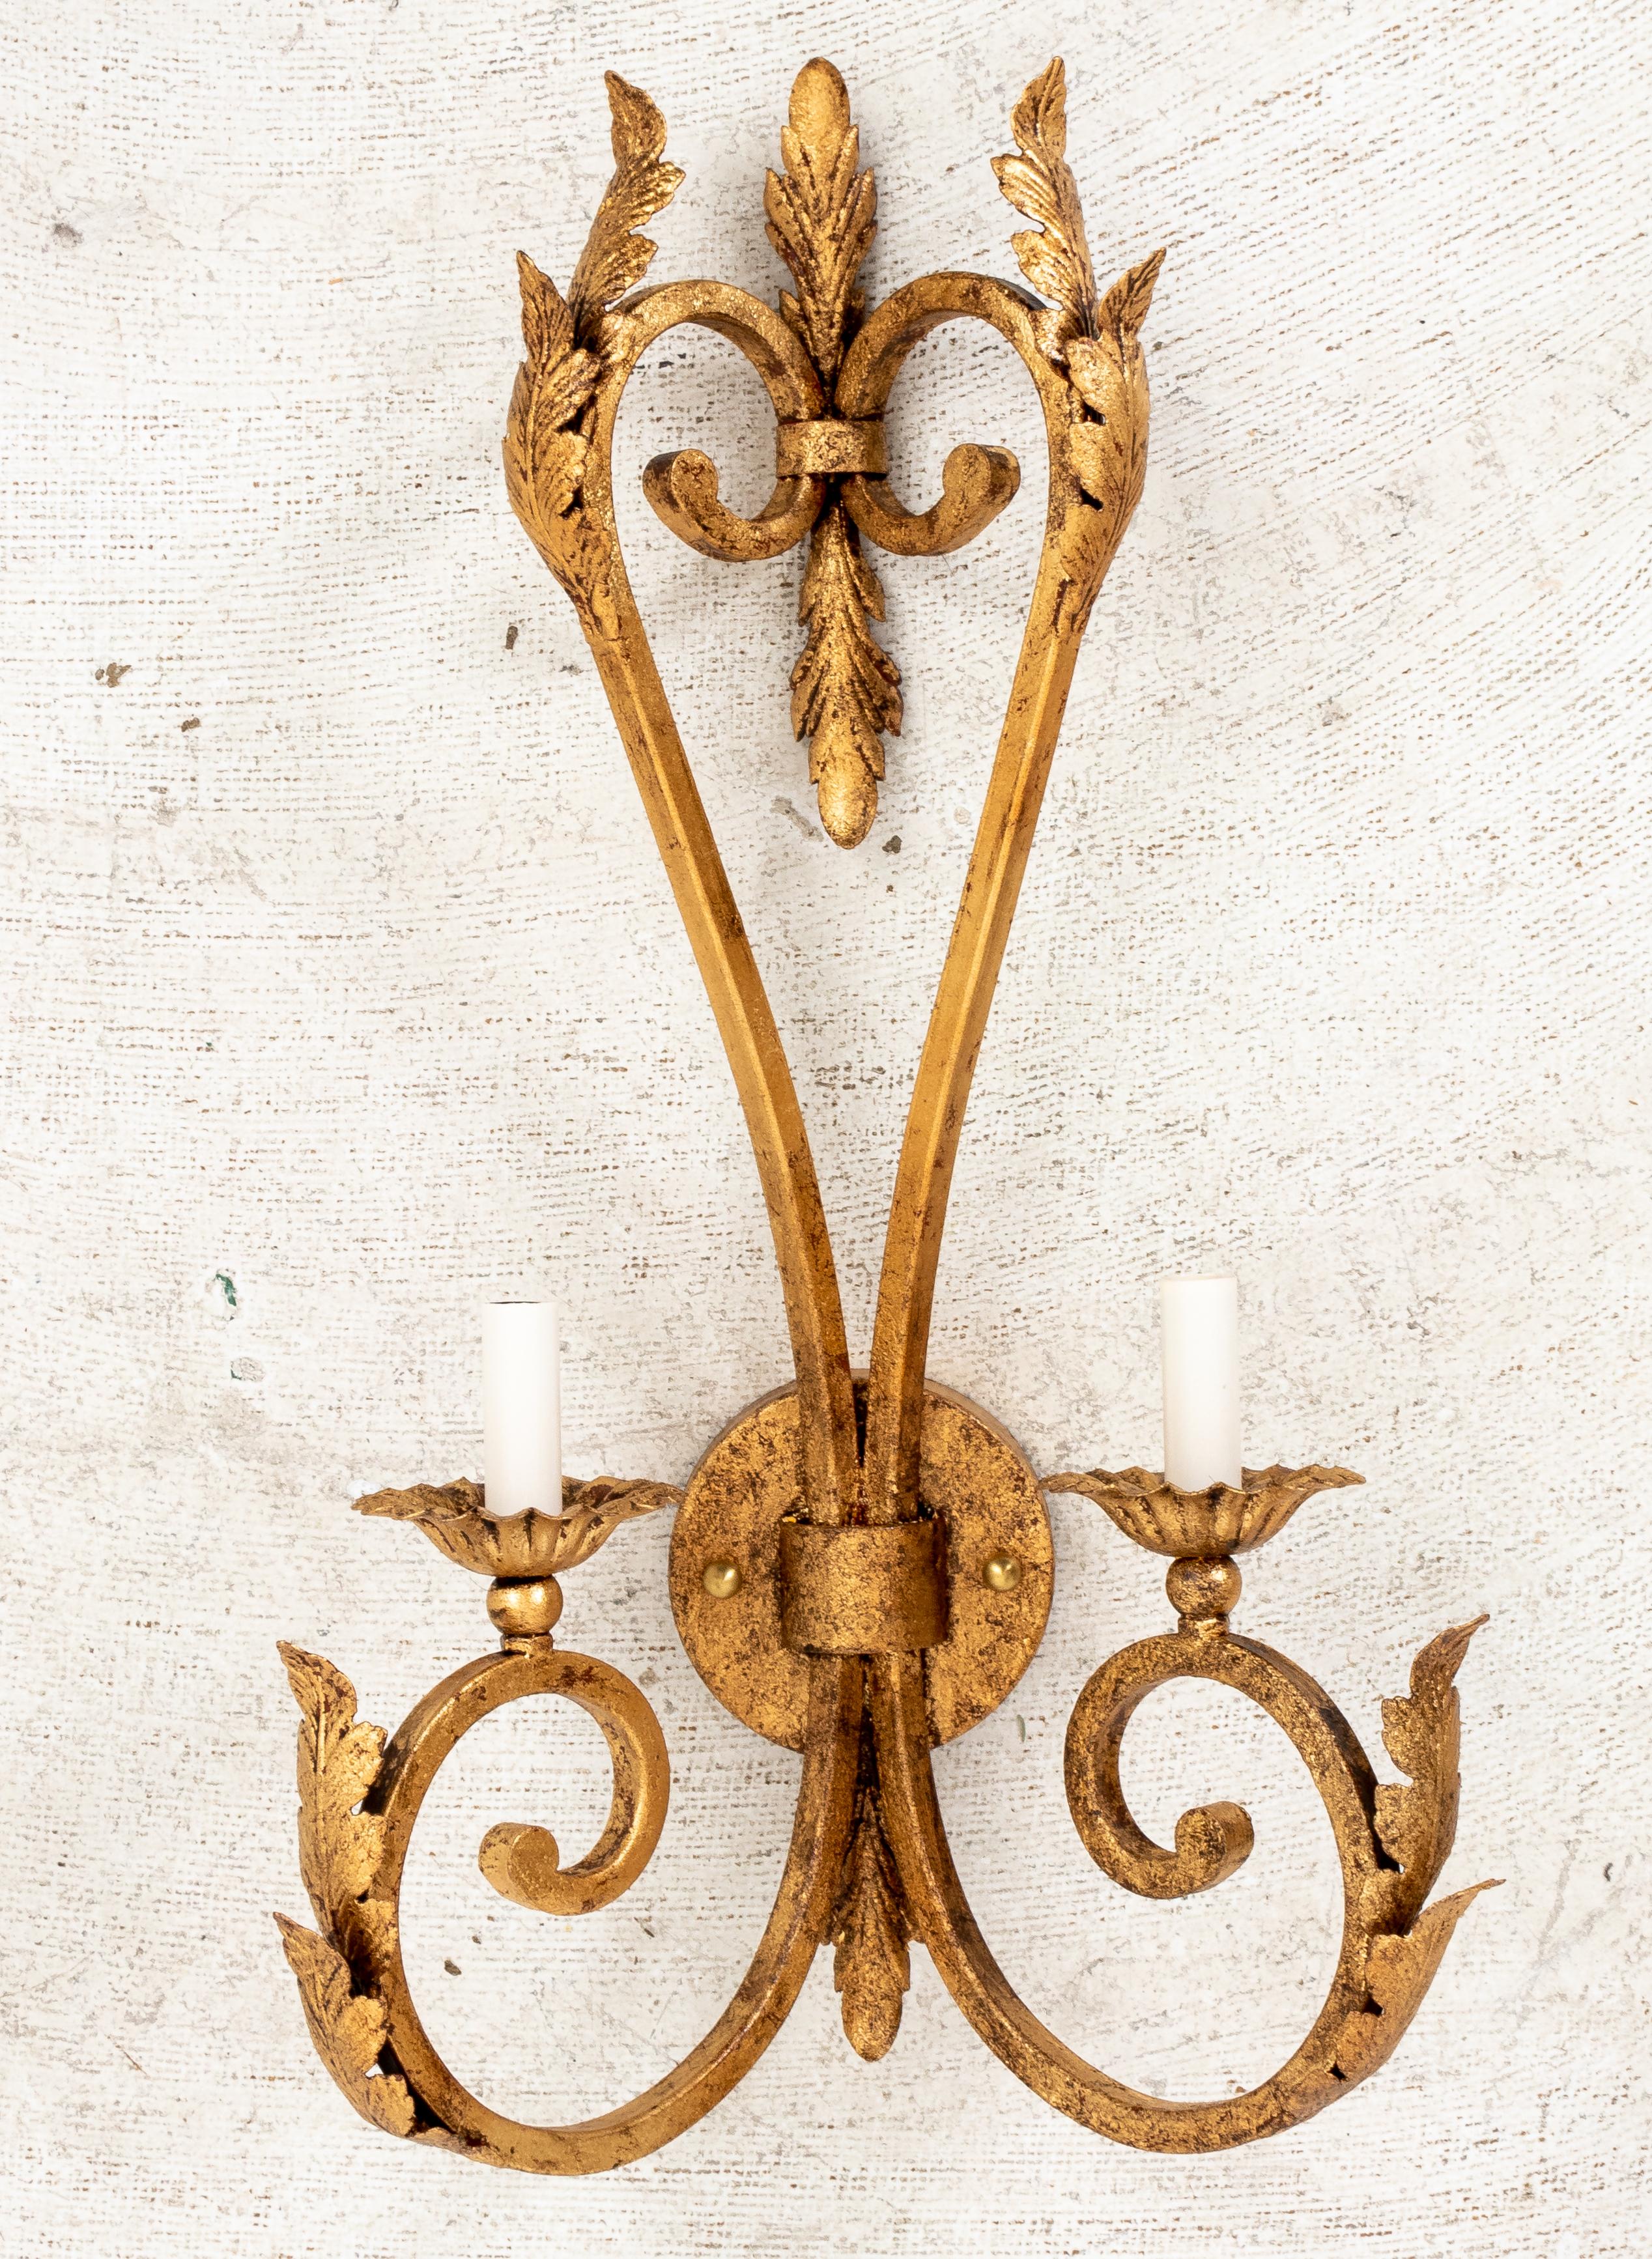 Pair of Hollywood Regency gilded iron sconces with two arms each. Handmade in Miami Lakes FL by 